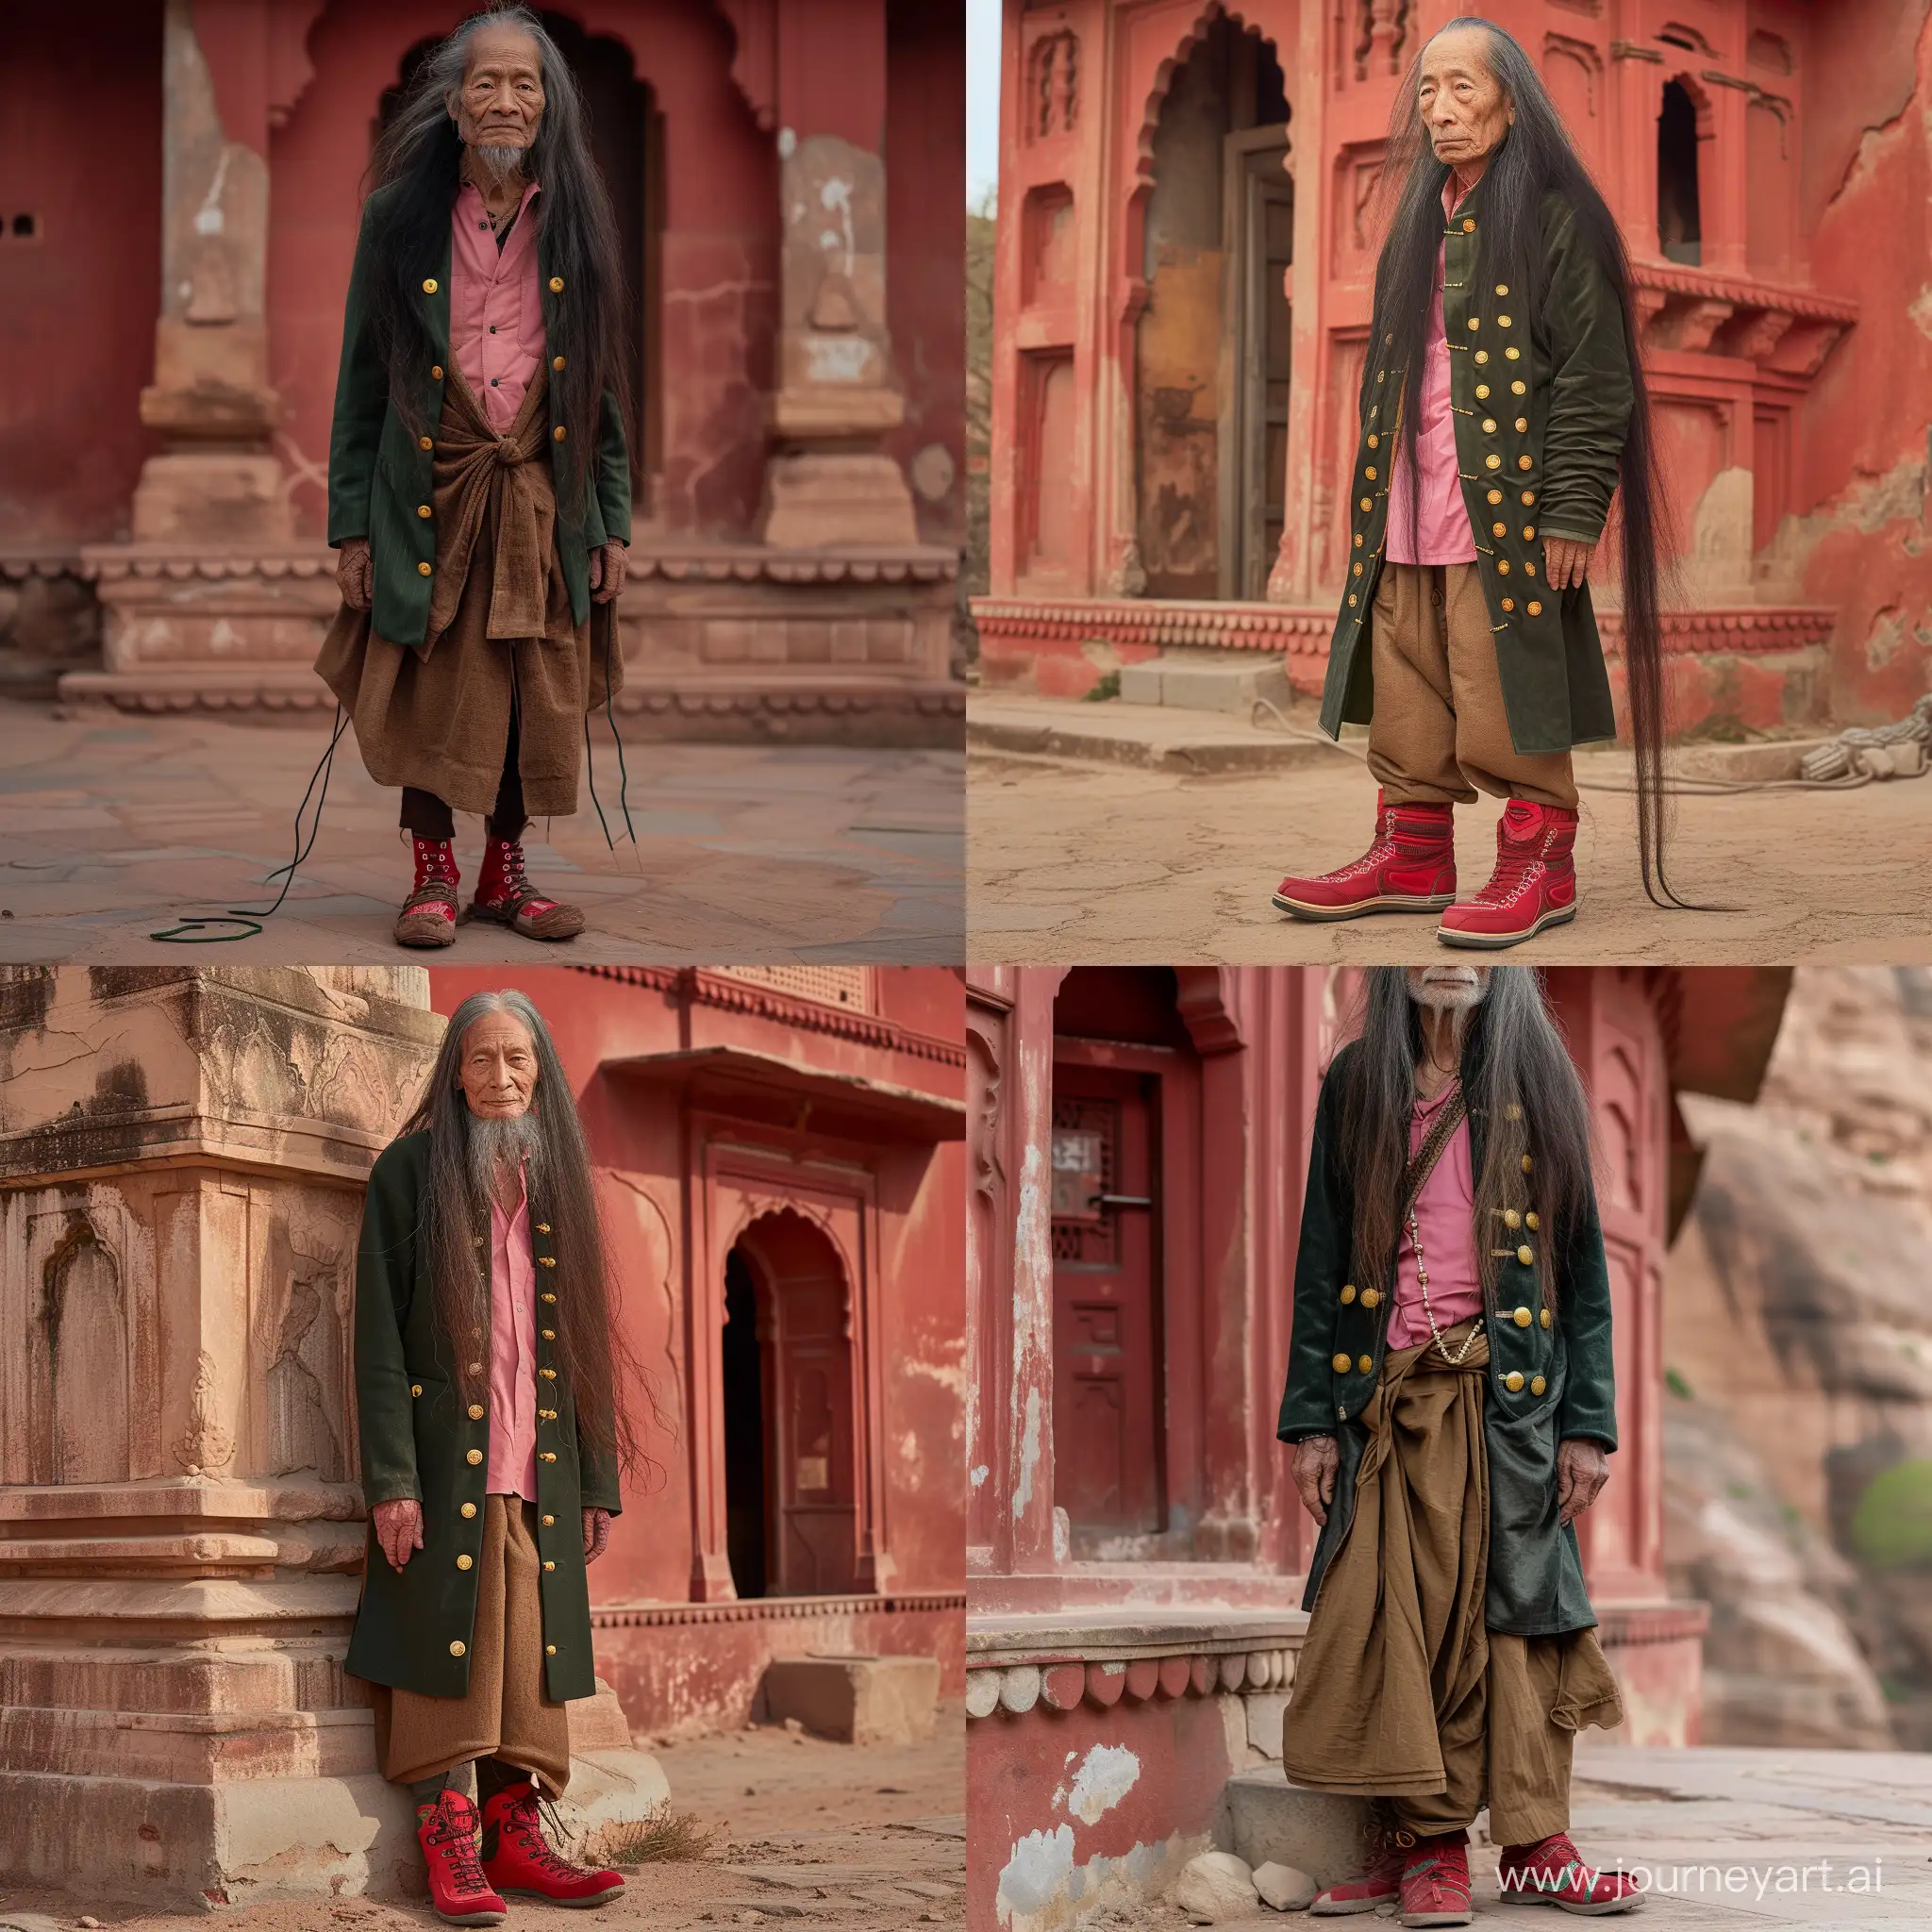 Elegant-Japanese-Elderly-Man-in-Traditional-Attire-Standing-by-Rustic-Rajasthan-Building